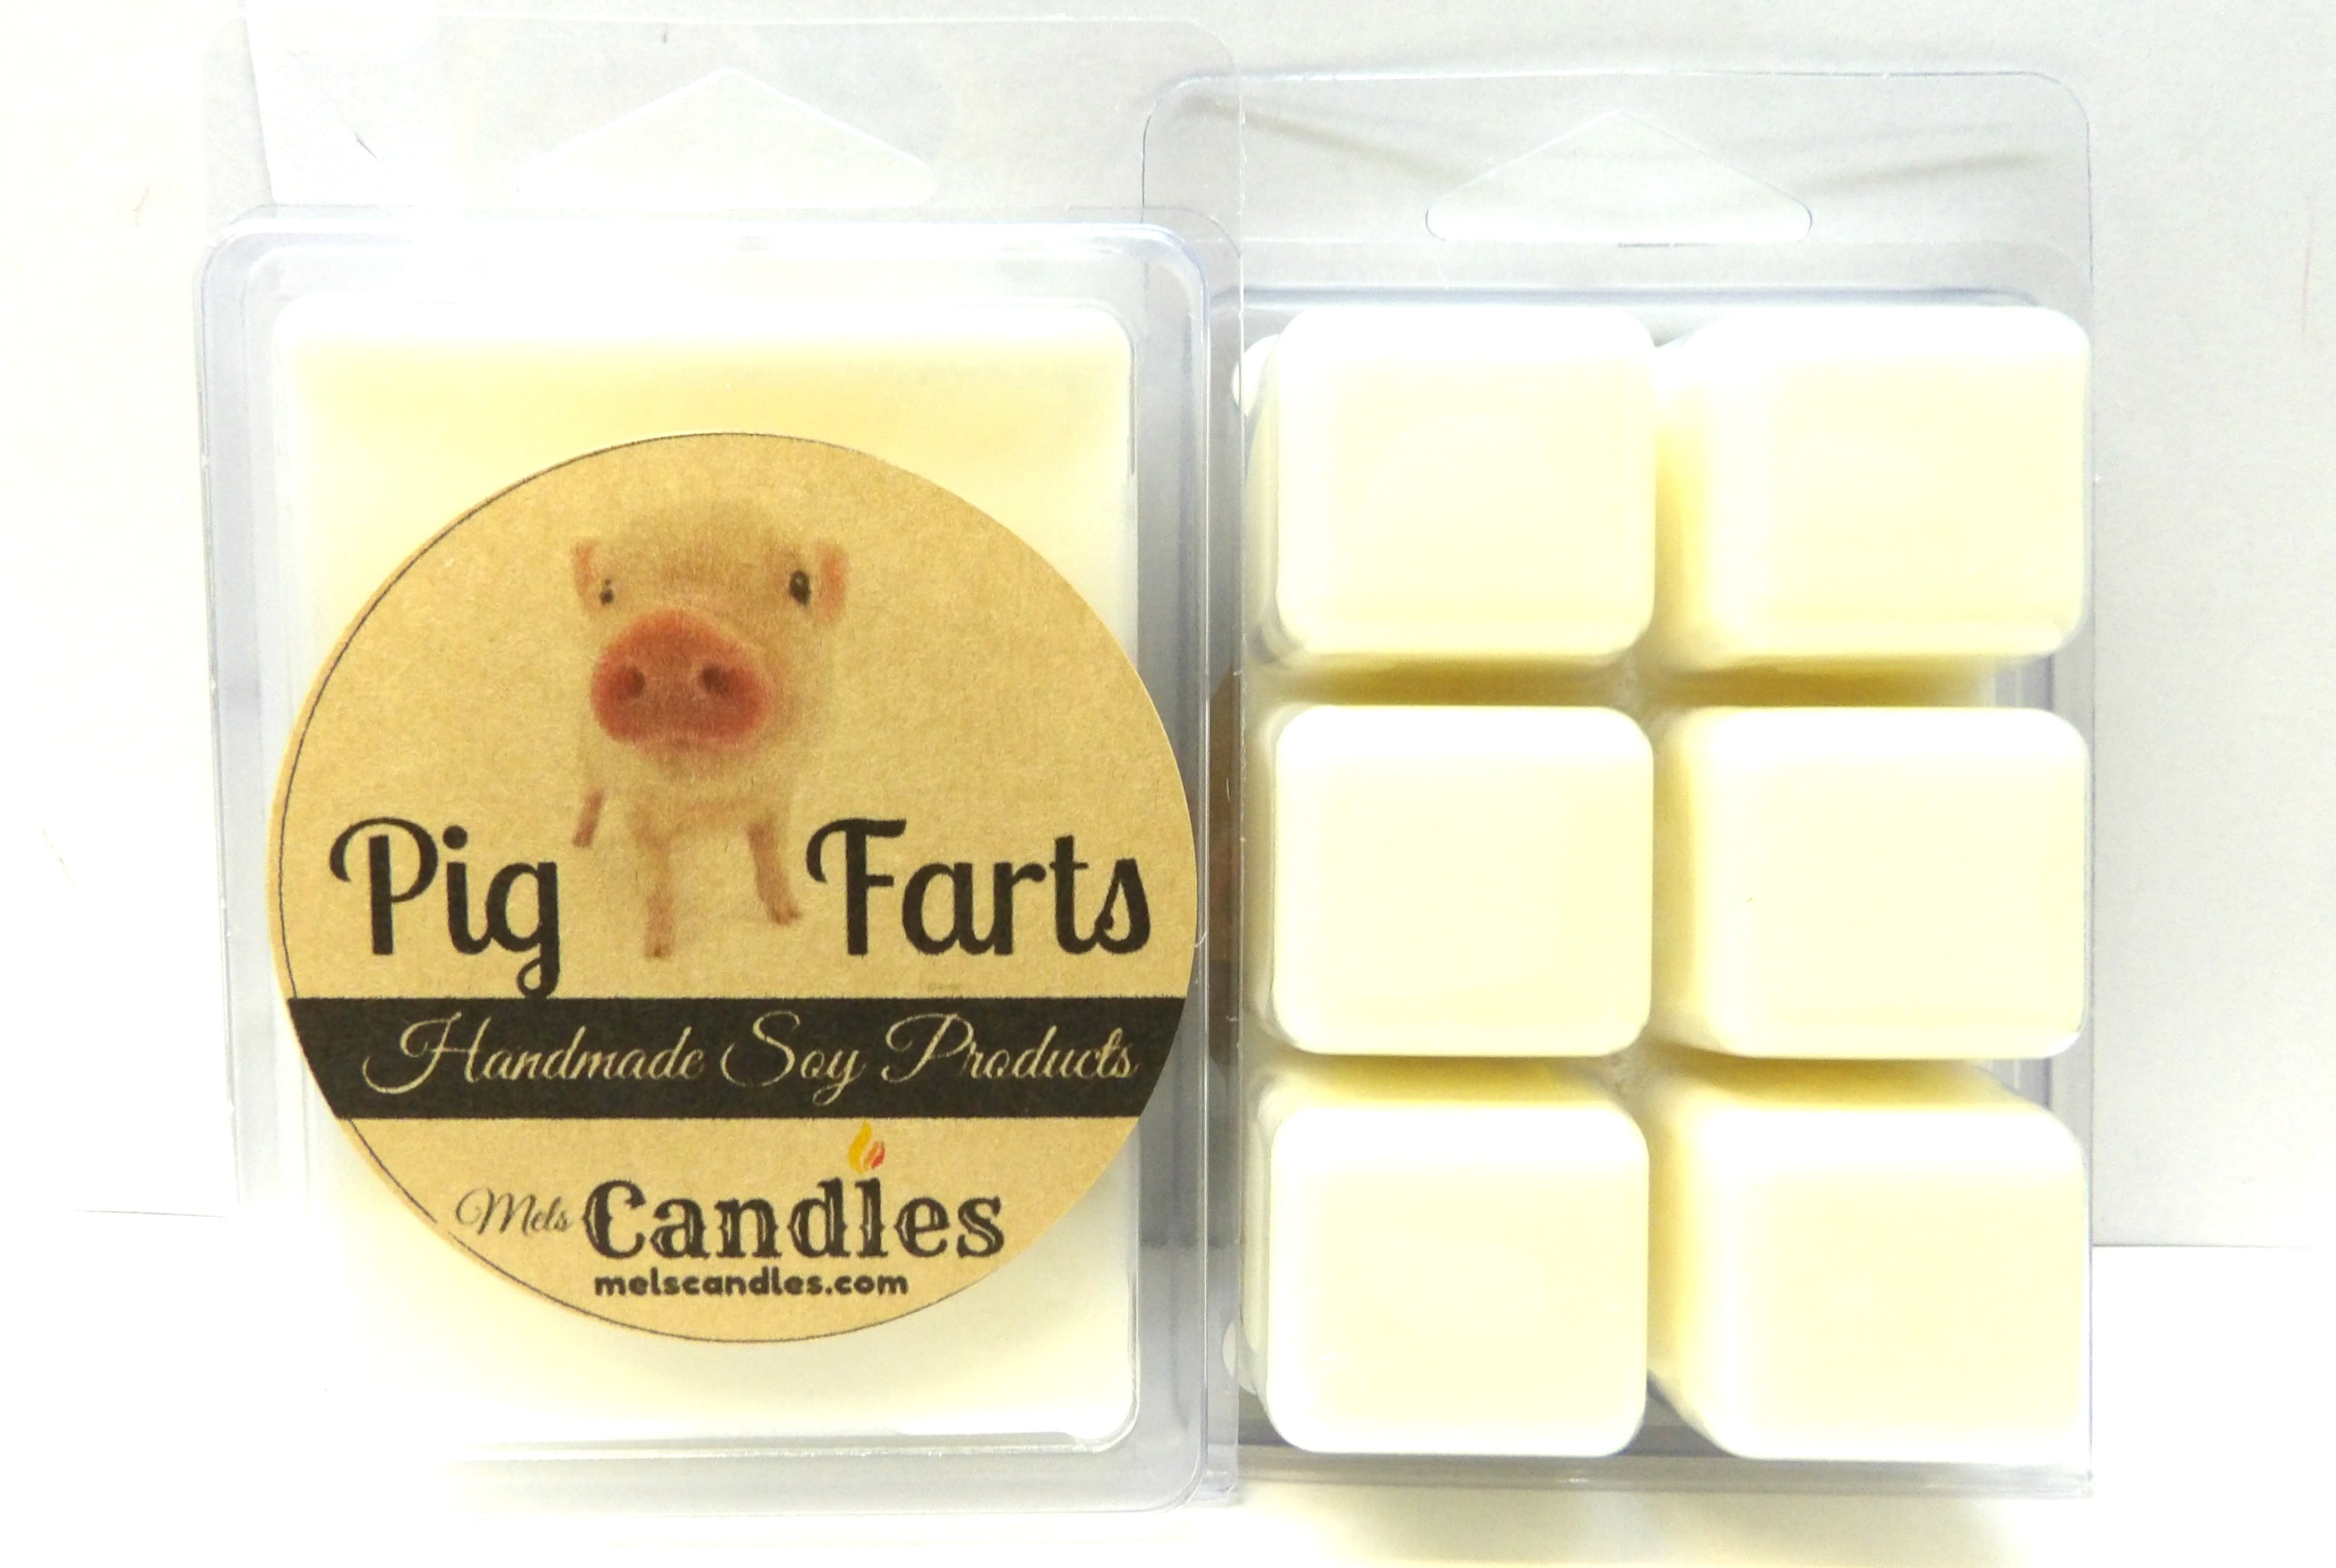 Santa Farts 3.2 Ounce Pack of Soy Wax Tarts 6 Cubes Per Pack - Scent Brick Wic 